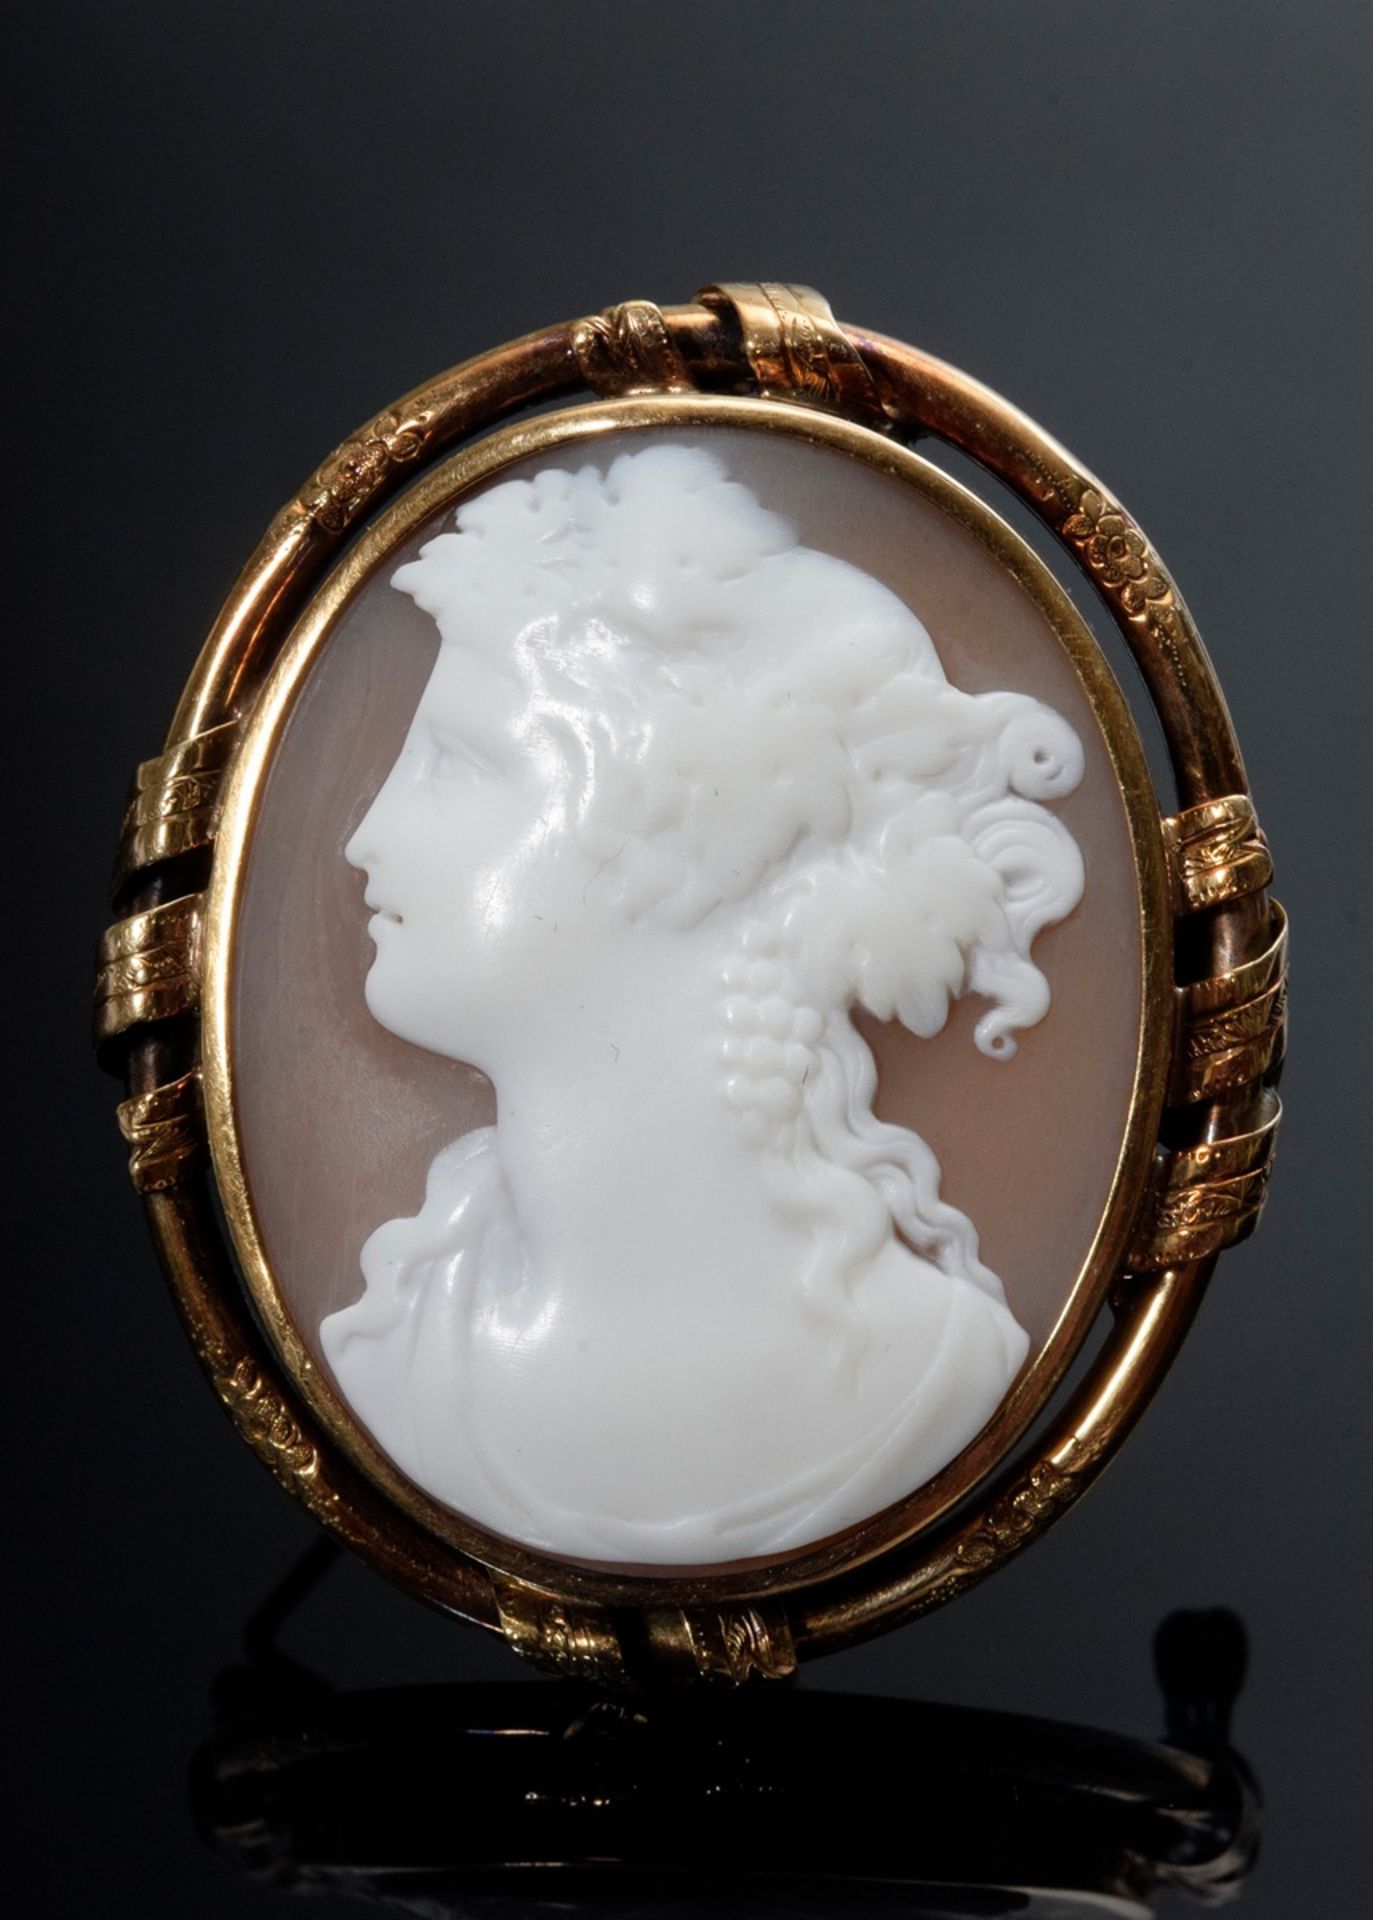 Oval shell cameo pin "Woman half portrait" in rose gold 585 setting, 11,7g, 4,5x3,6cm